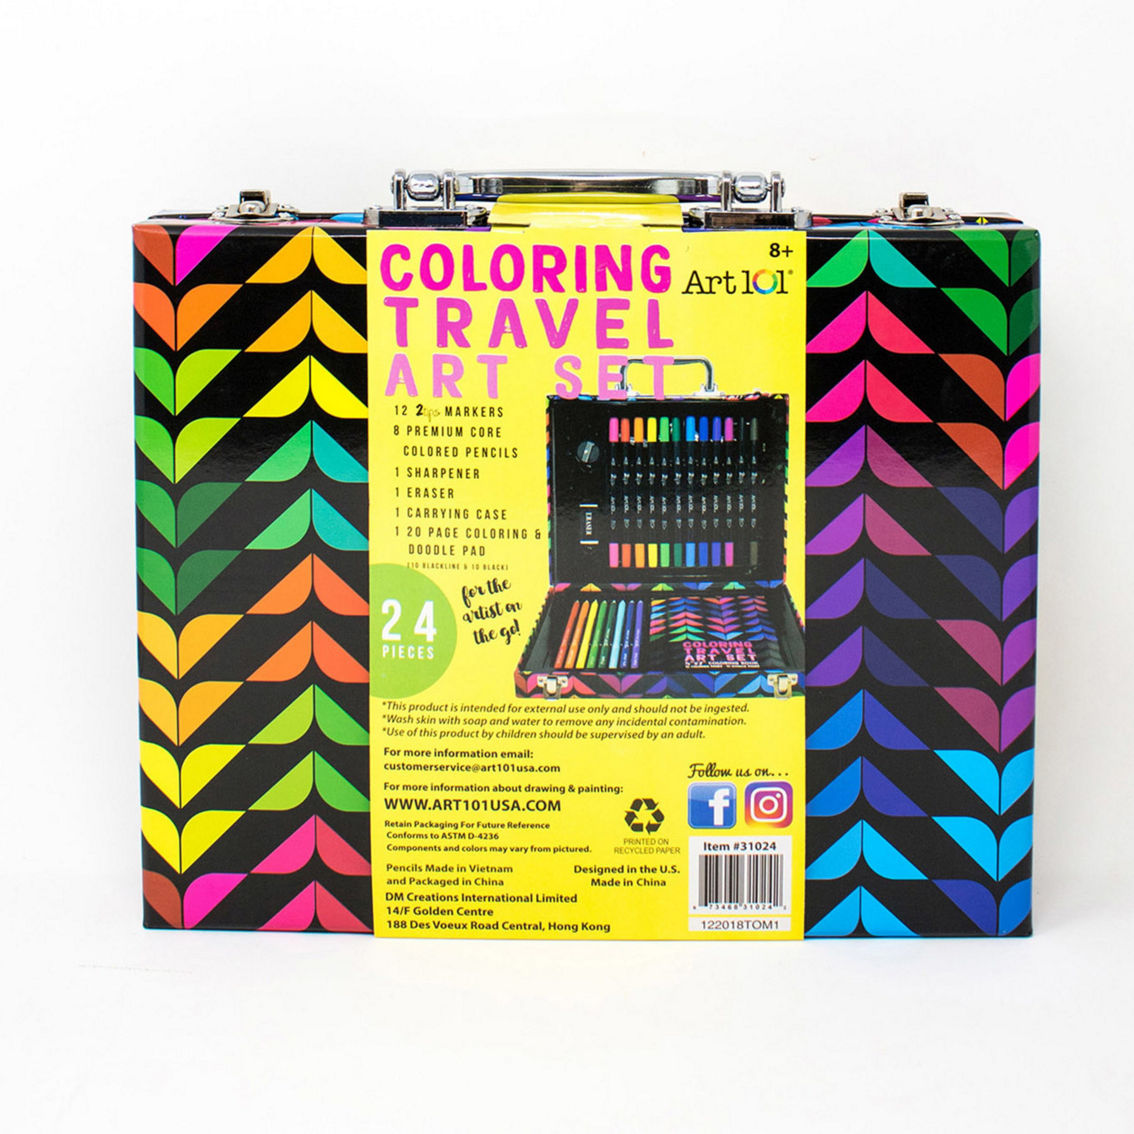 Art 101 Colorable Travel Art Kit - Image 2 of 5